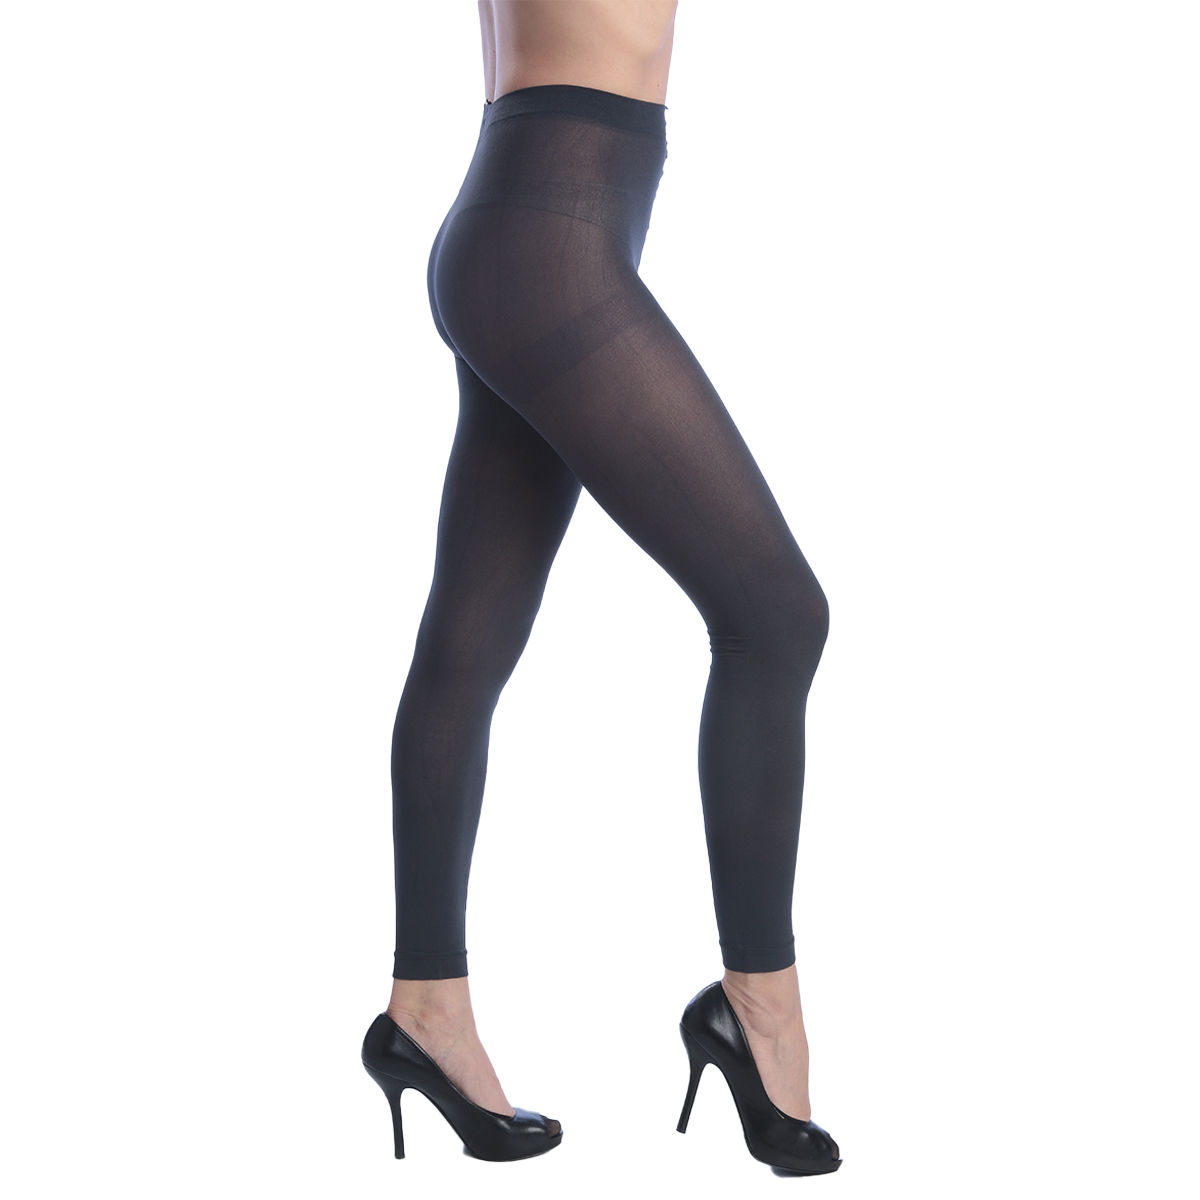 Bulk Women's Opaque Footless, Tights, Charcoal, One Size - DollarDays